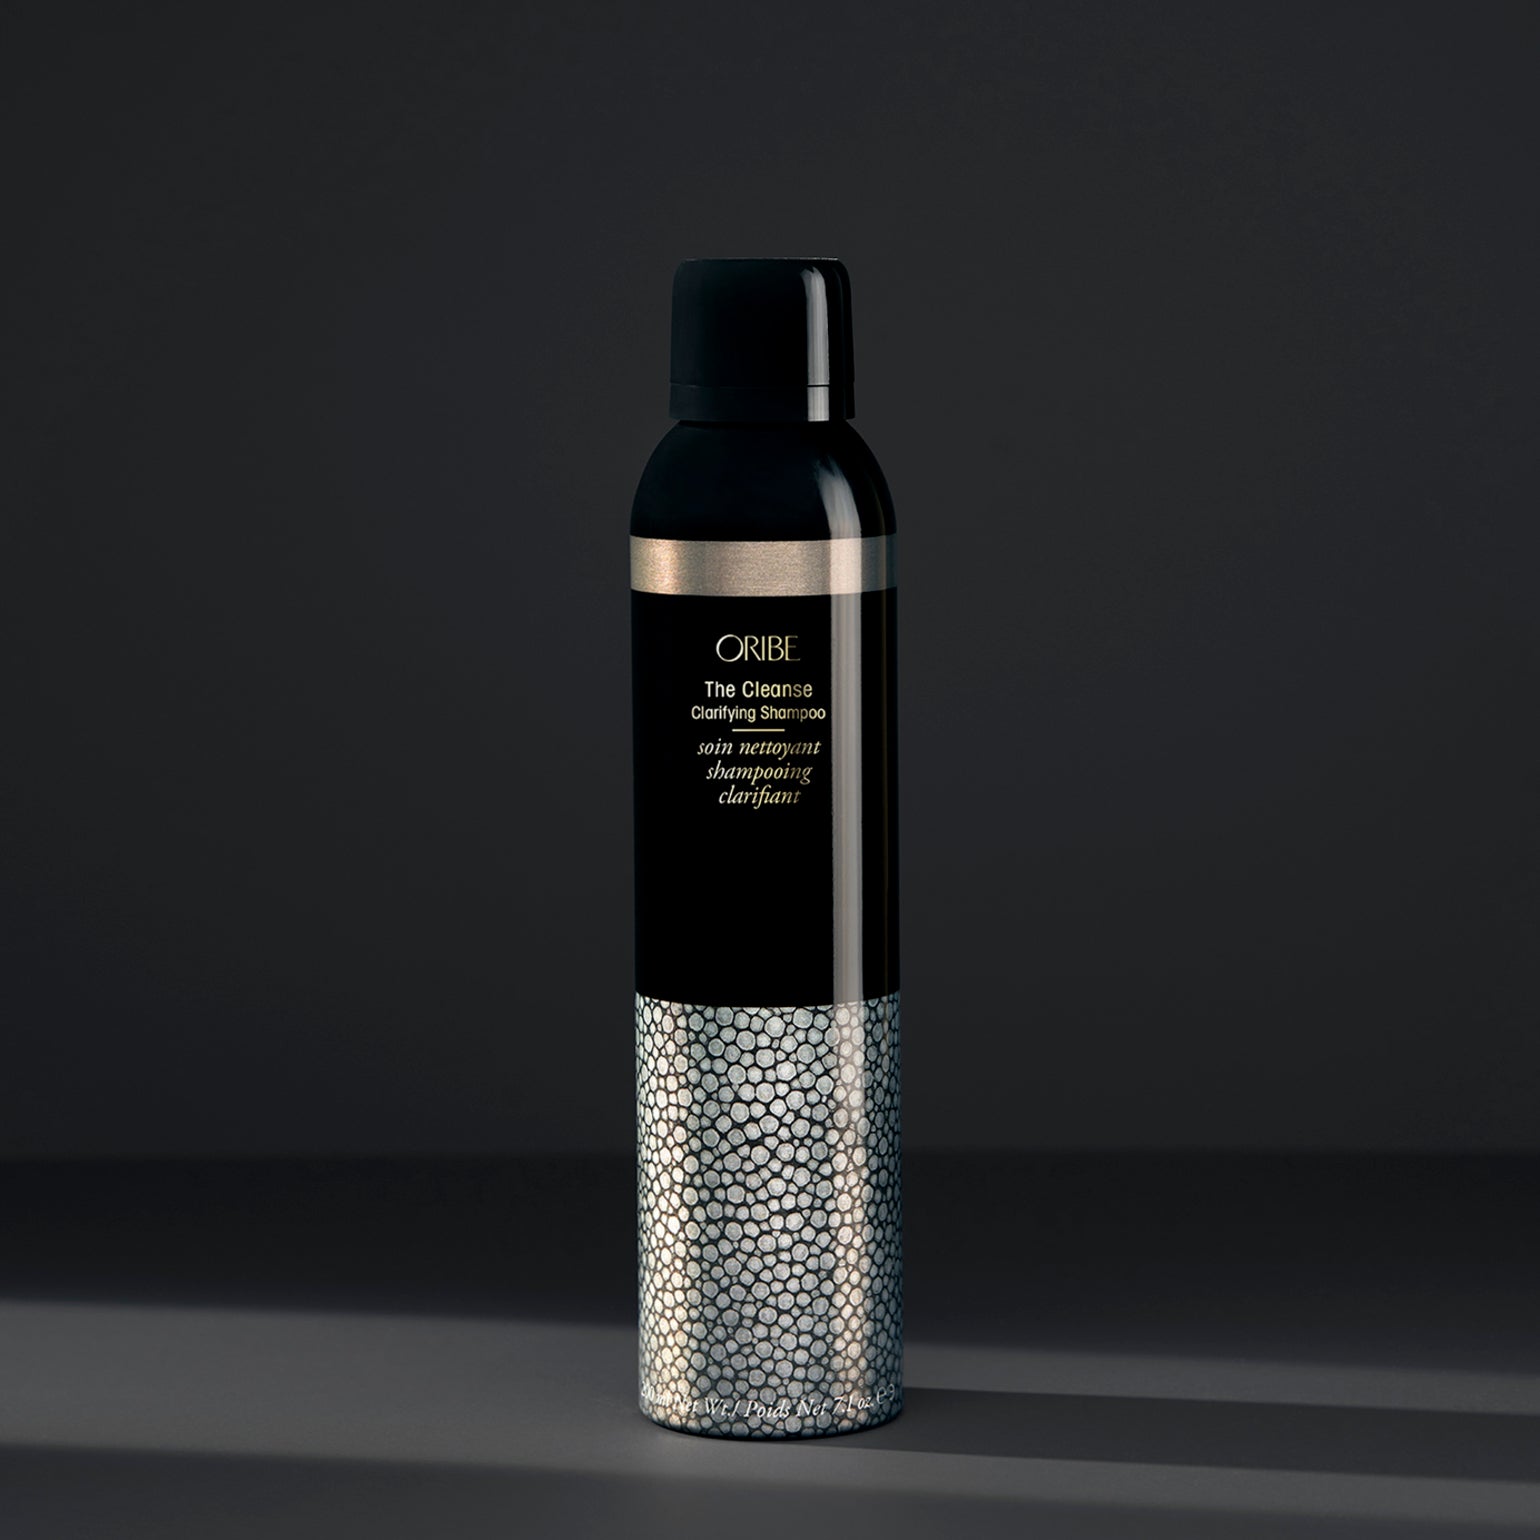 The Cleanse Clarifying Shampoo by Oribe